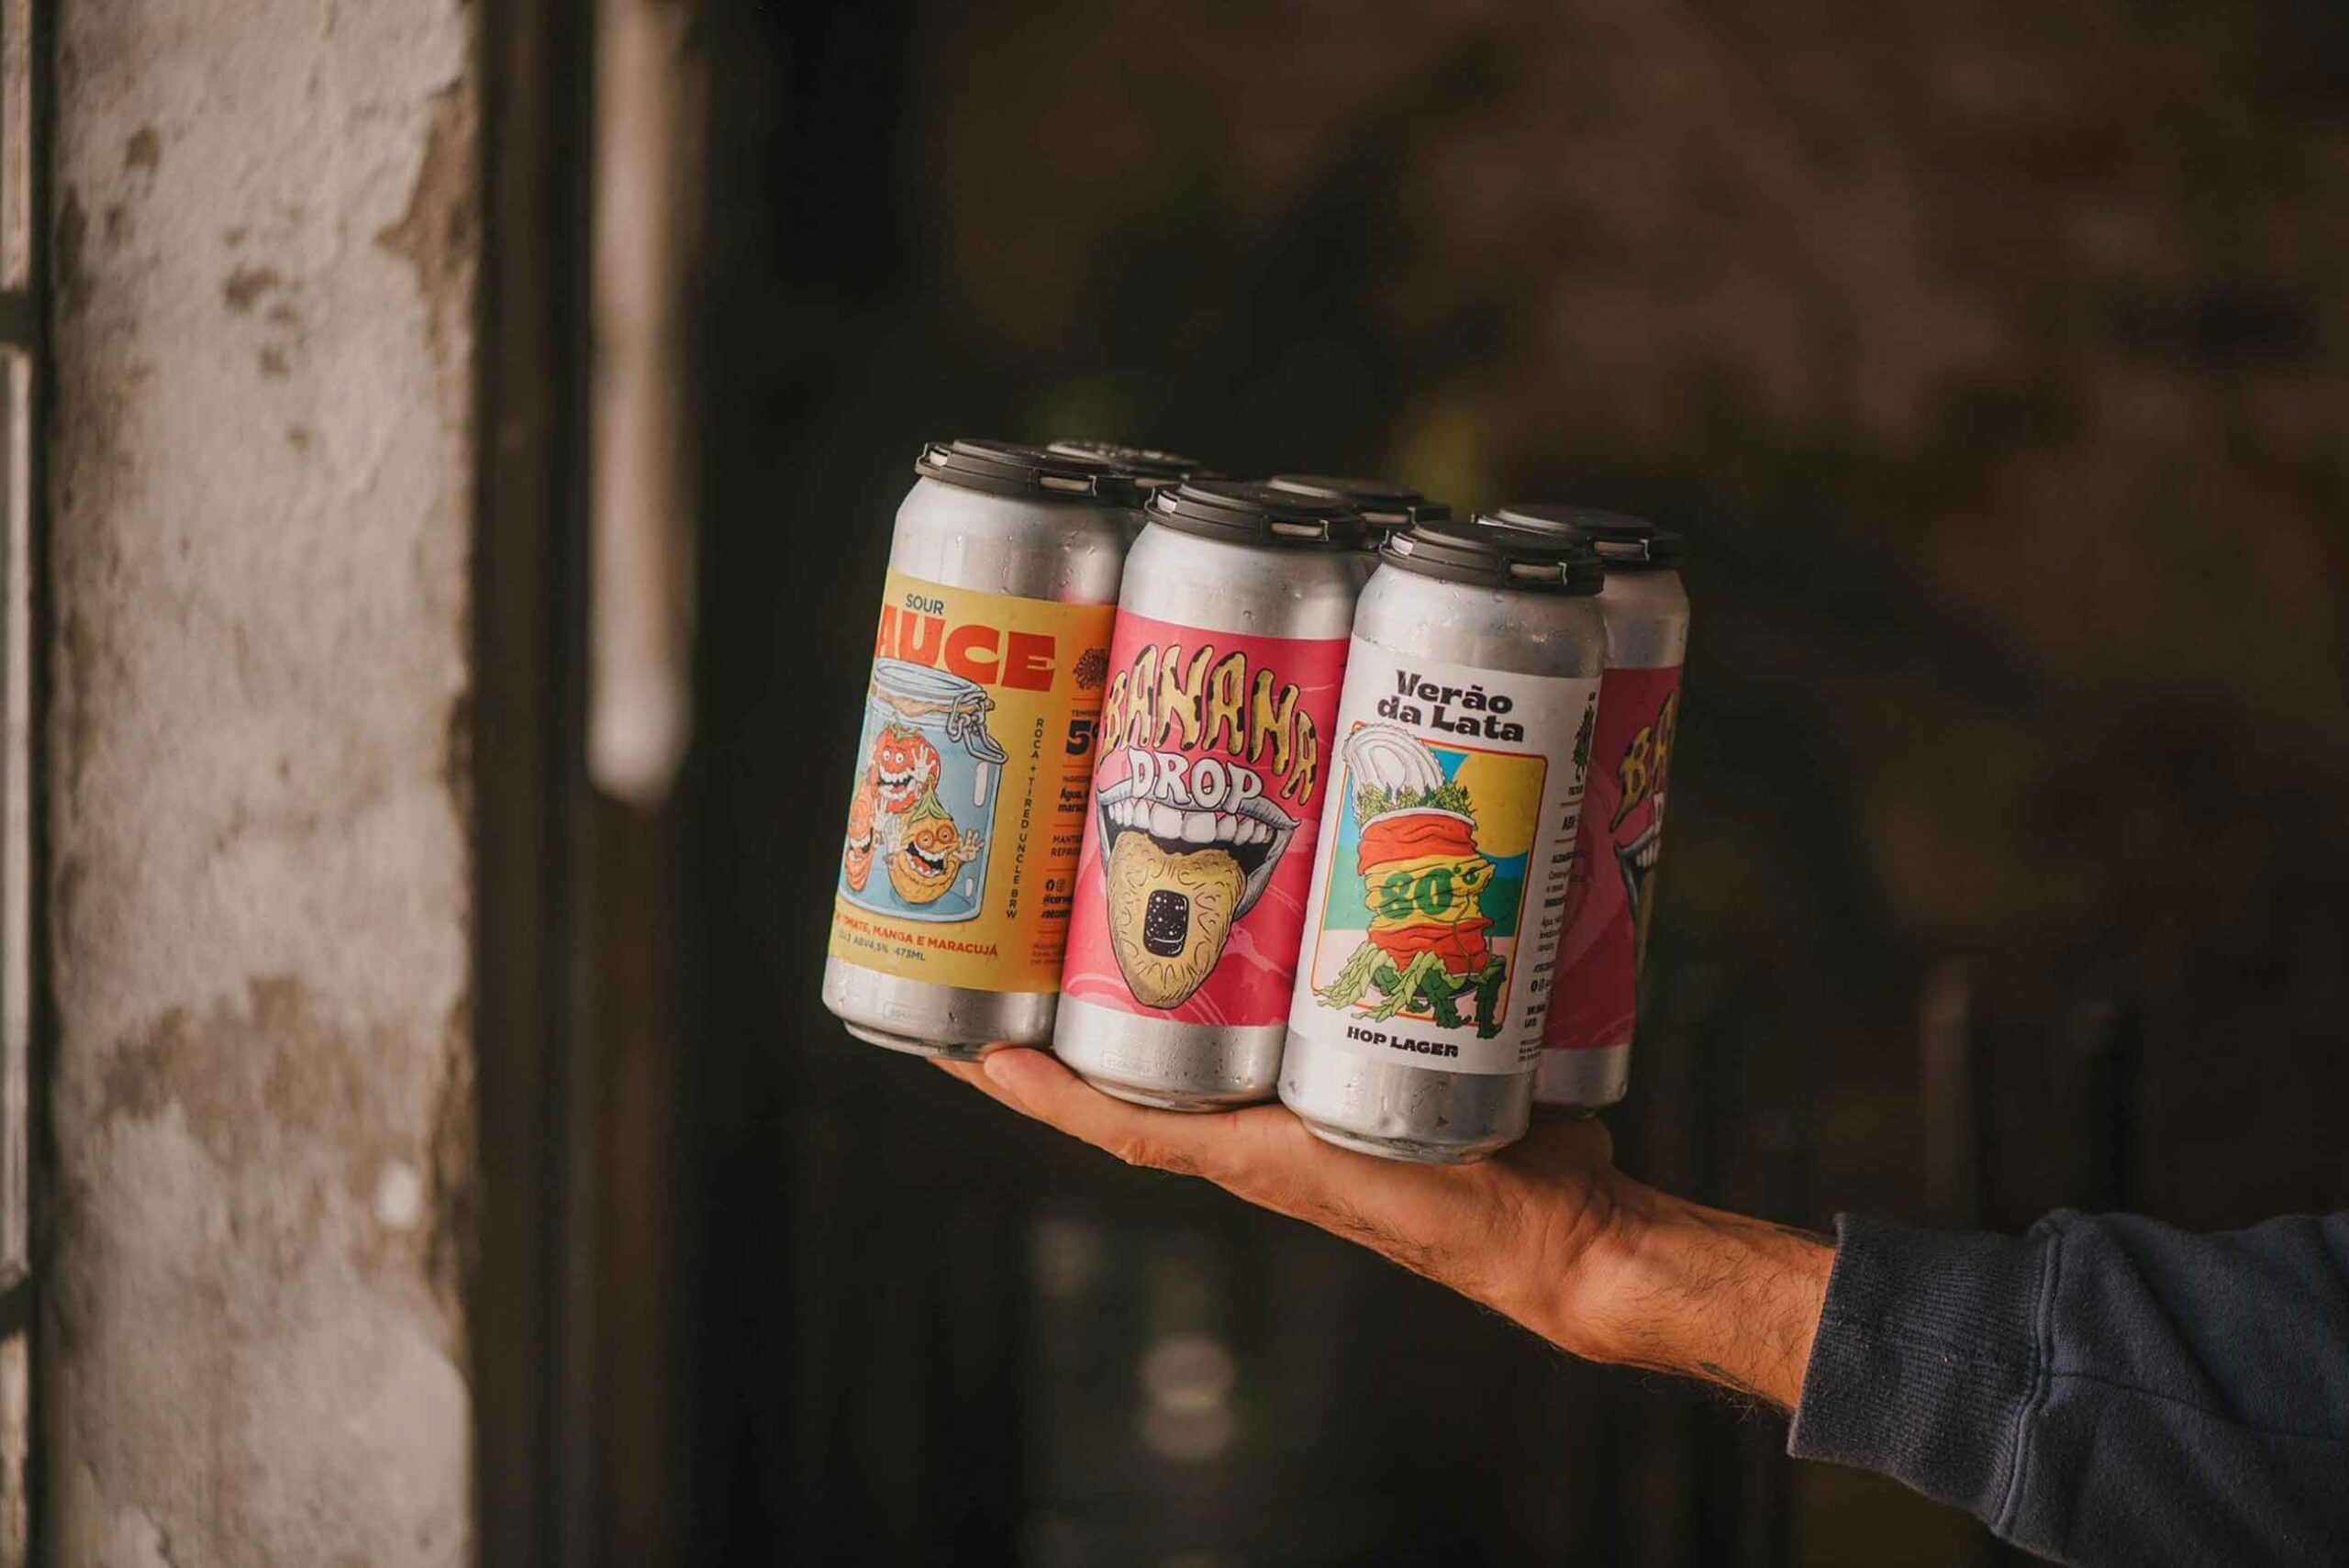 Roca Craft Beer: Bridging Tradition and Urban Modernity in Packaging Design